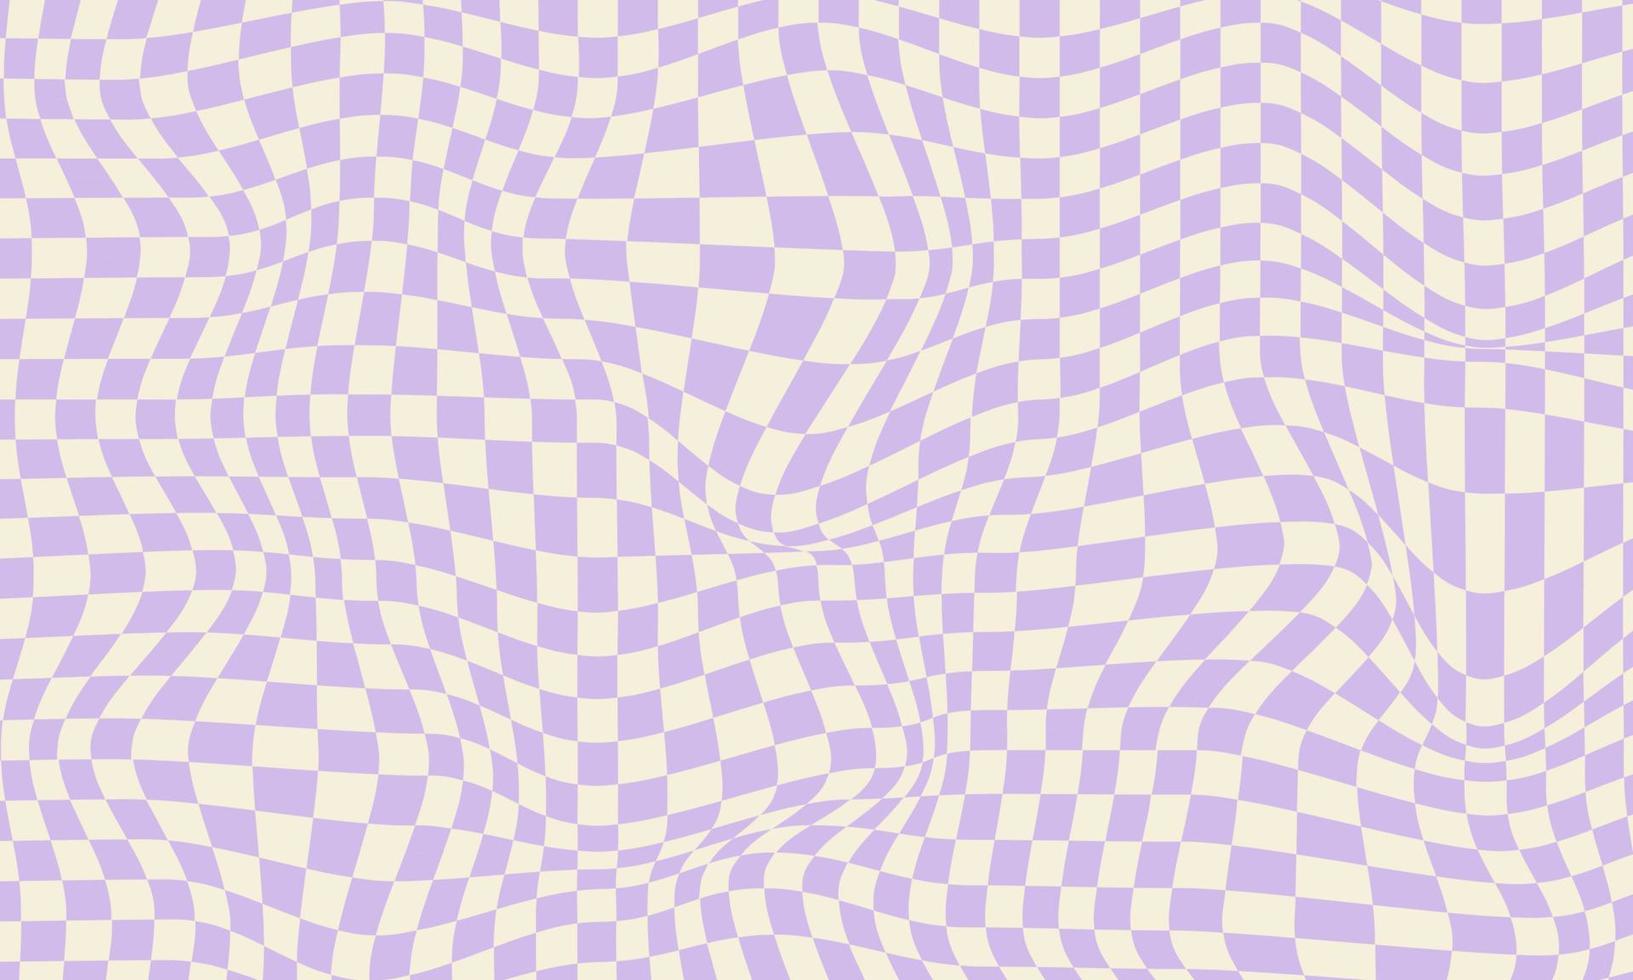 Trendy wavy purple background. Vector illustration of checkered wallpaper with optical illusion